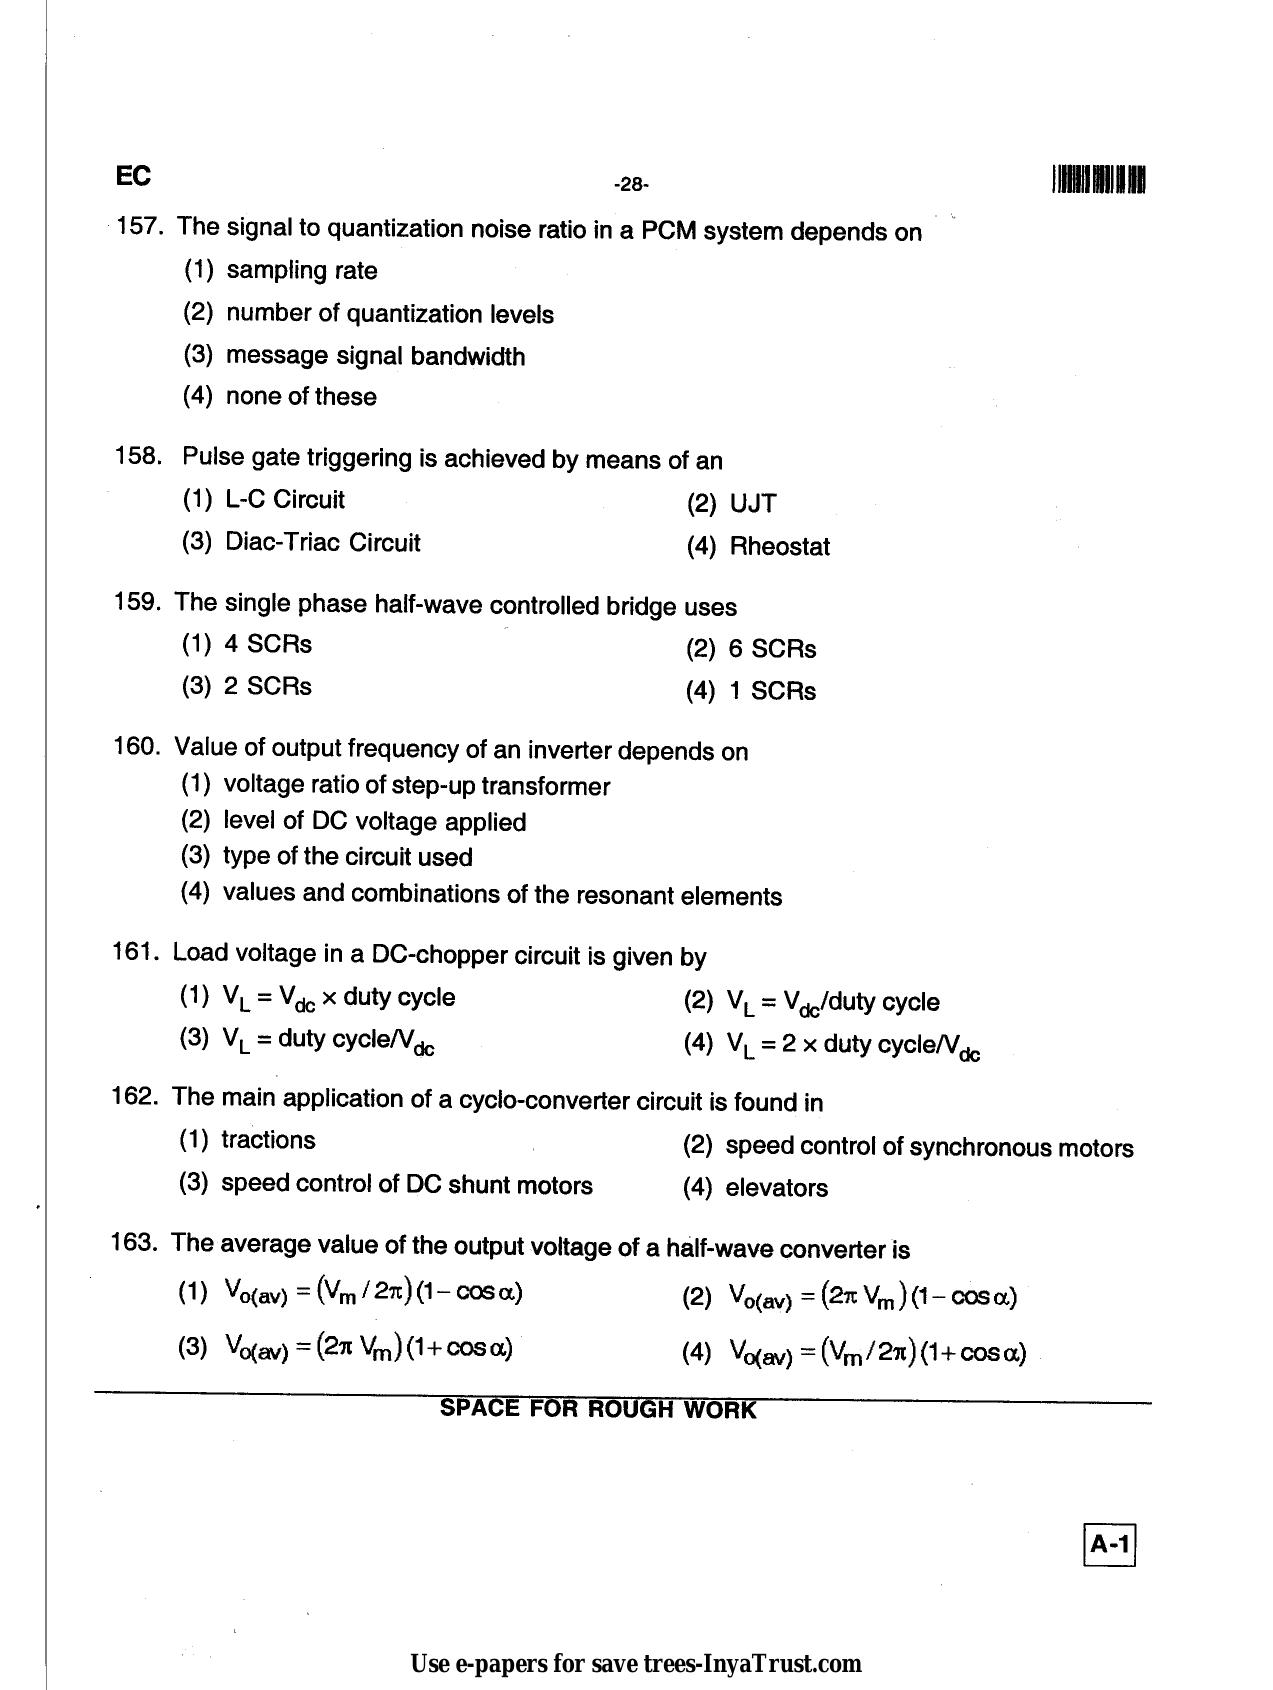 Karnataka Diploma CET- 2013 Electronics and Communication Engineering Question Paper - Page 28